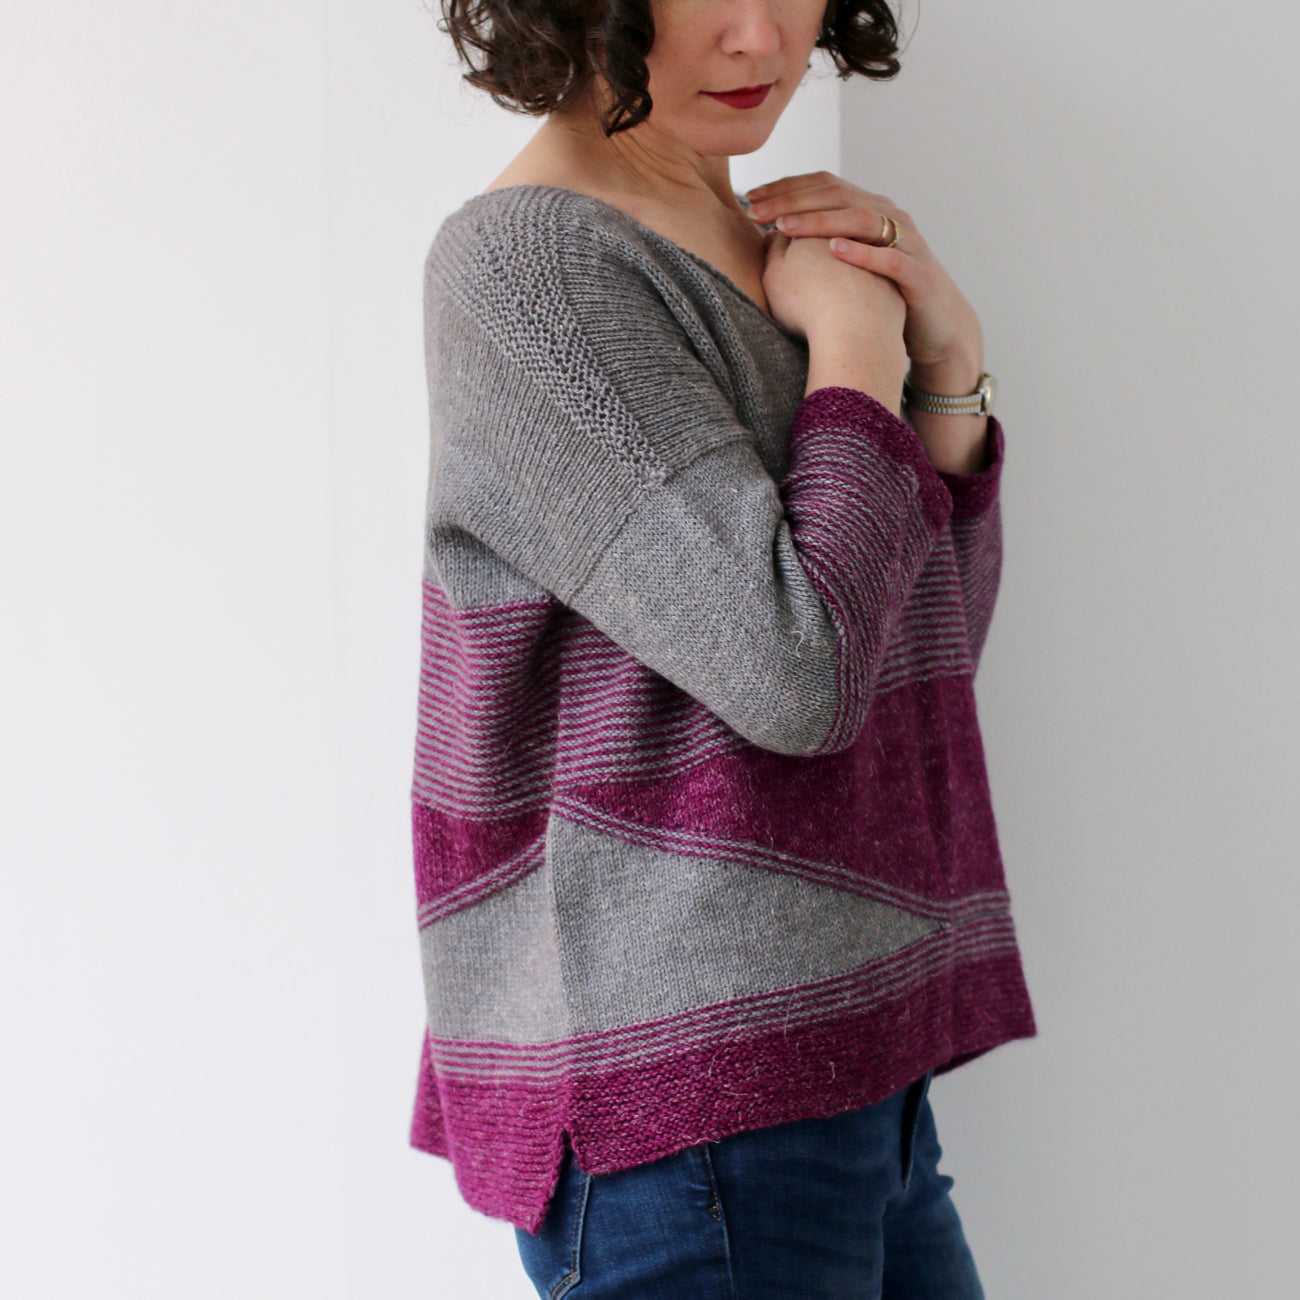 Coiled Magenta Sweater Pattern